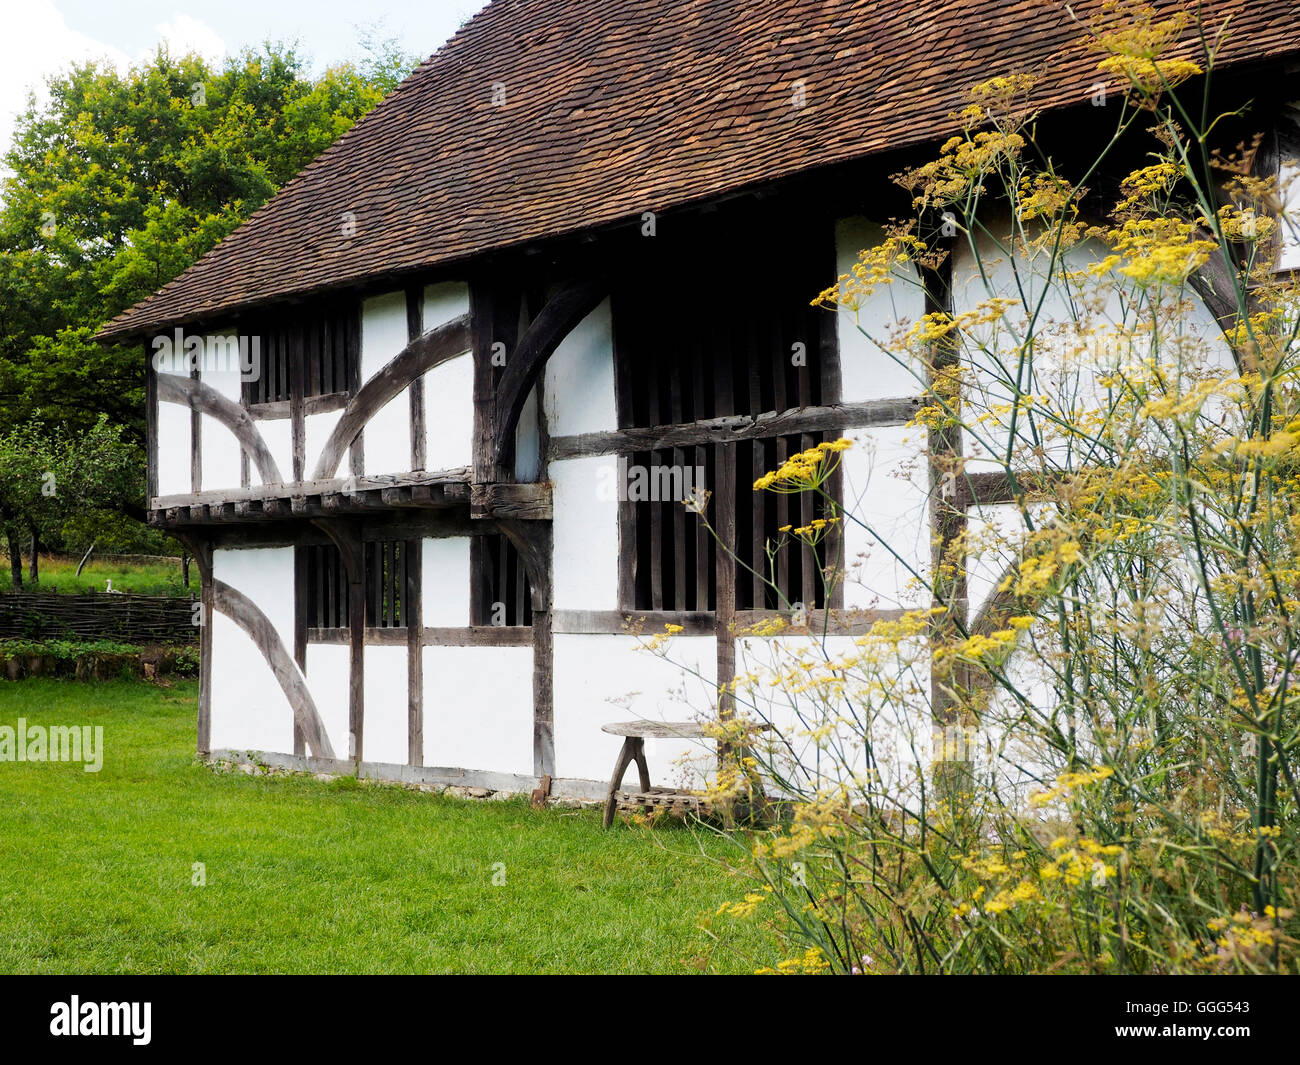 Bayleaf Farmhouse, an early 16th century hall-house timber framed building at Weald & Downland Museum, Sussex. Stock Photo